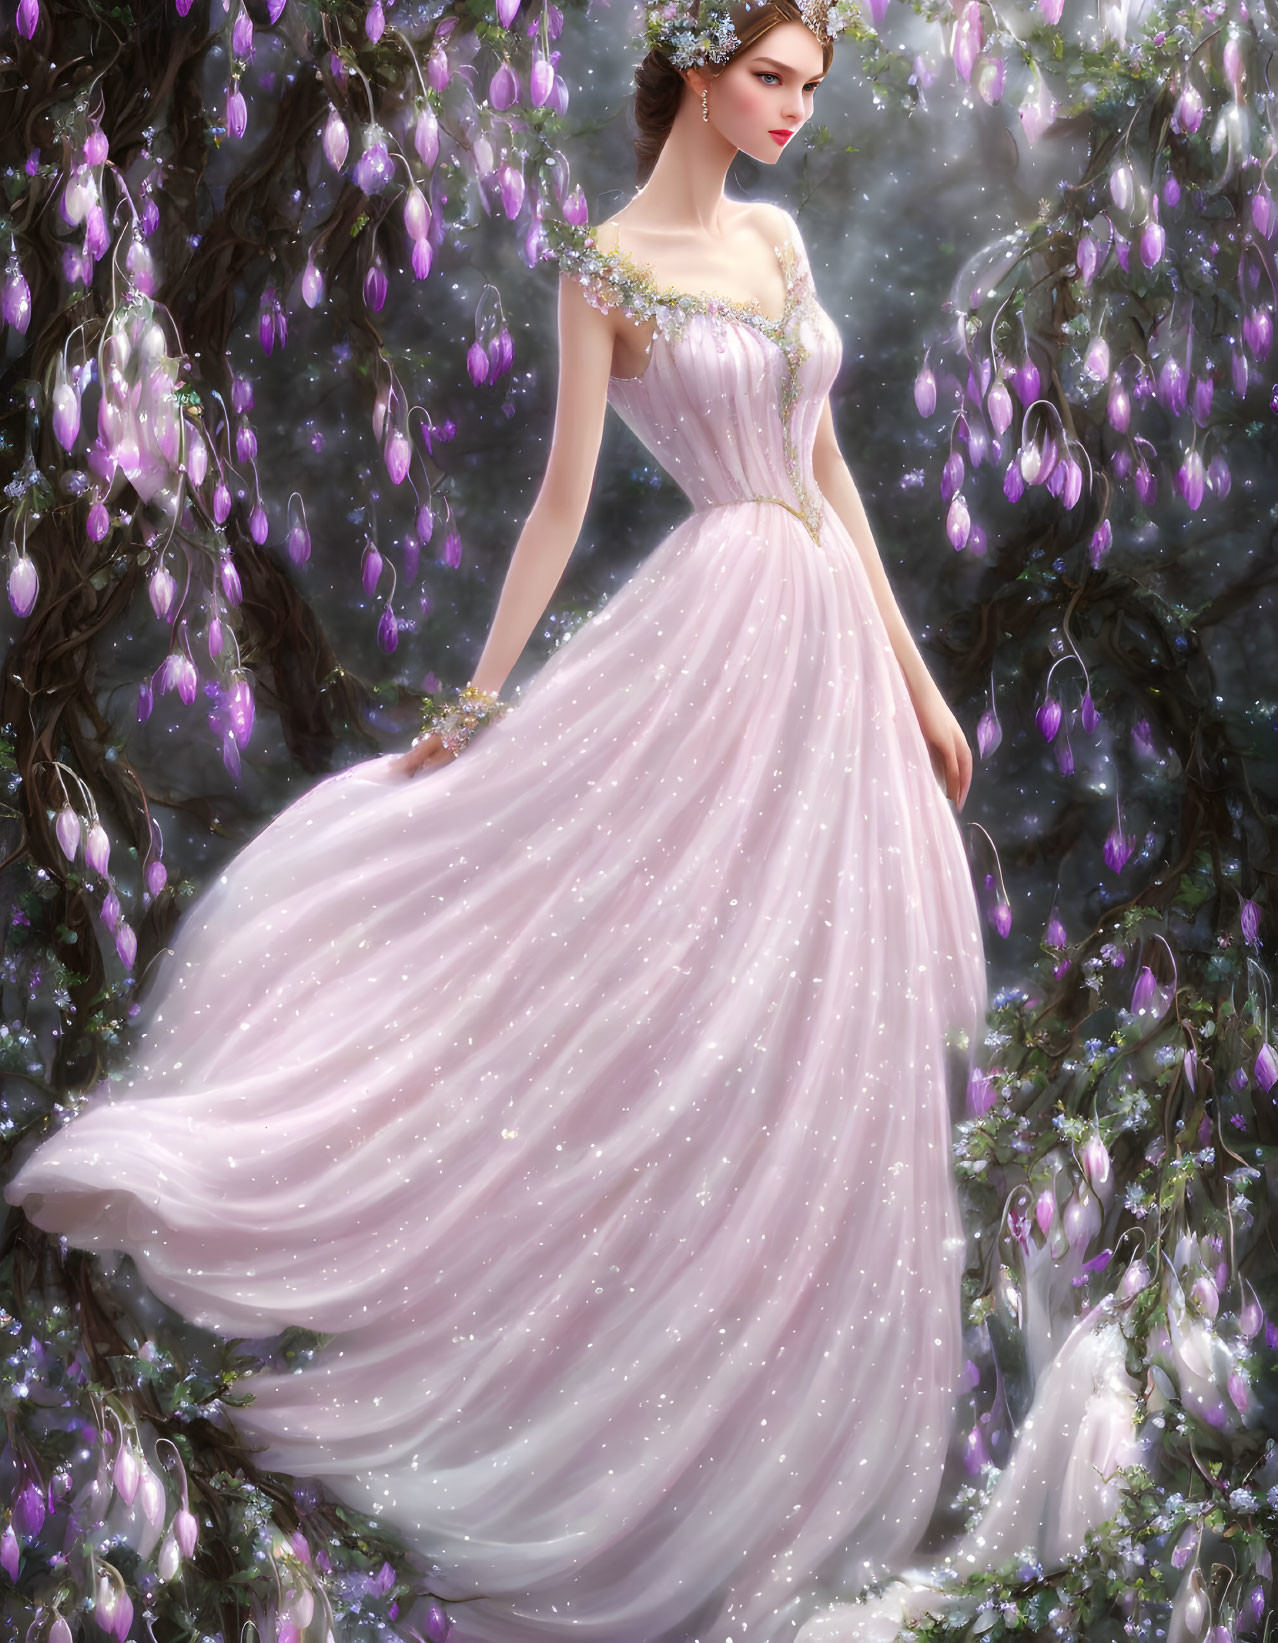 Woman in Pink Gown with Floral Headpiece Surrounded by Purple Wisteria